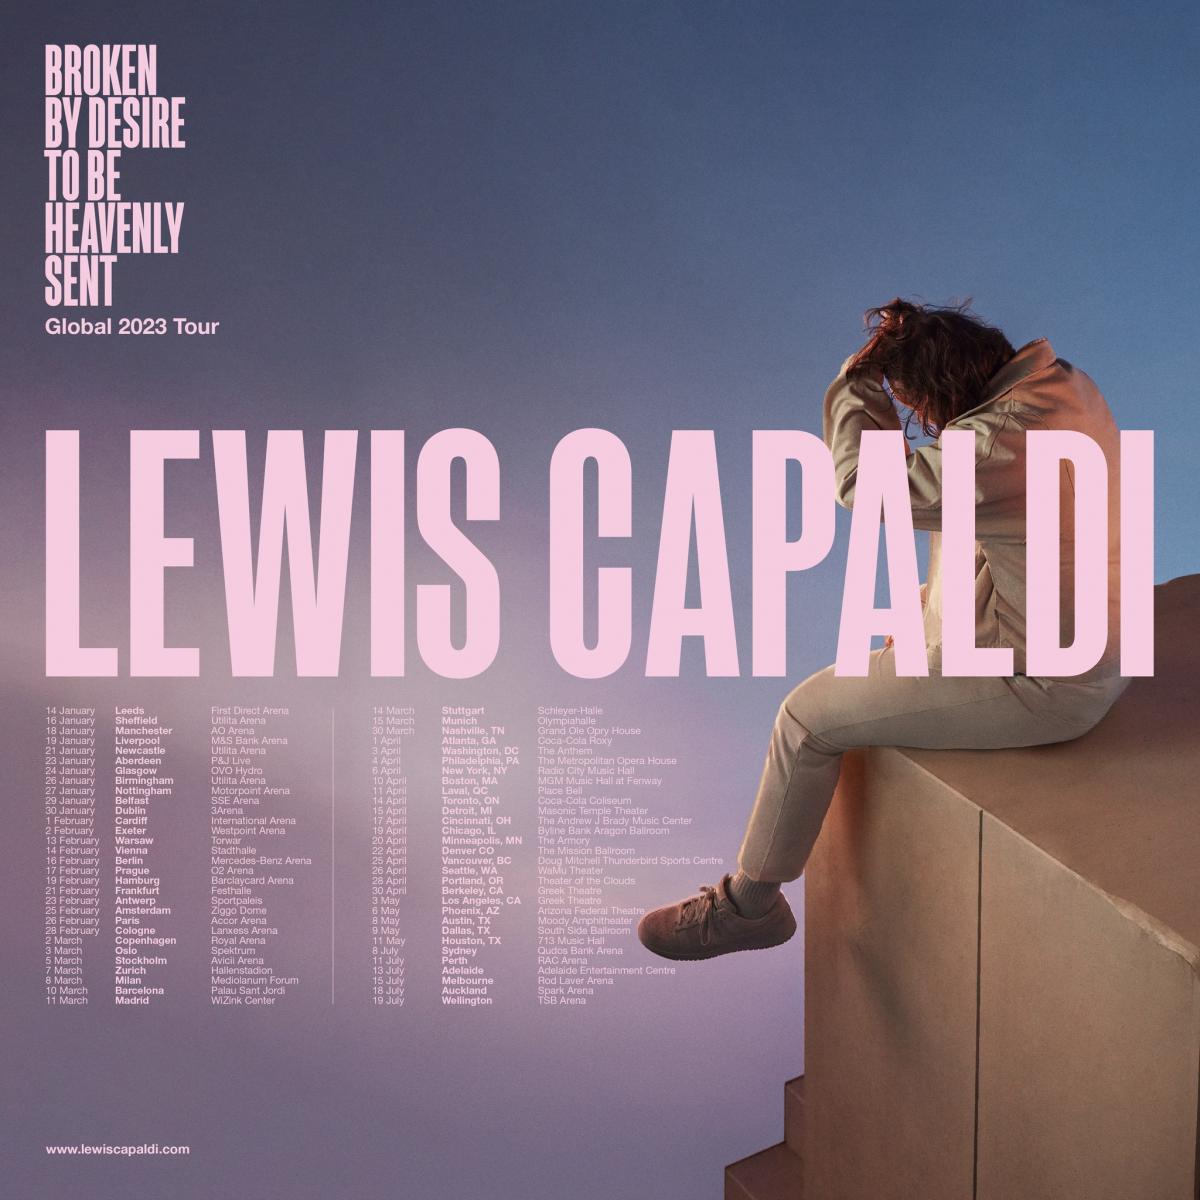 Lewis Capaldi Tickets For 2023 UK And European Arena Tour On Sale 9am